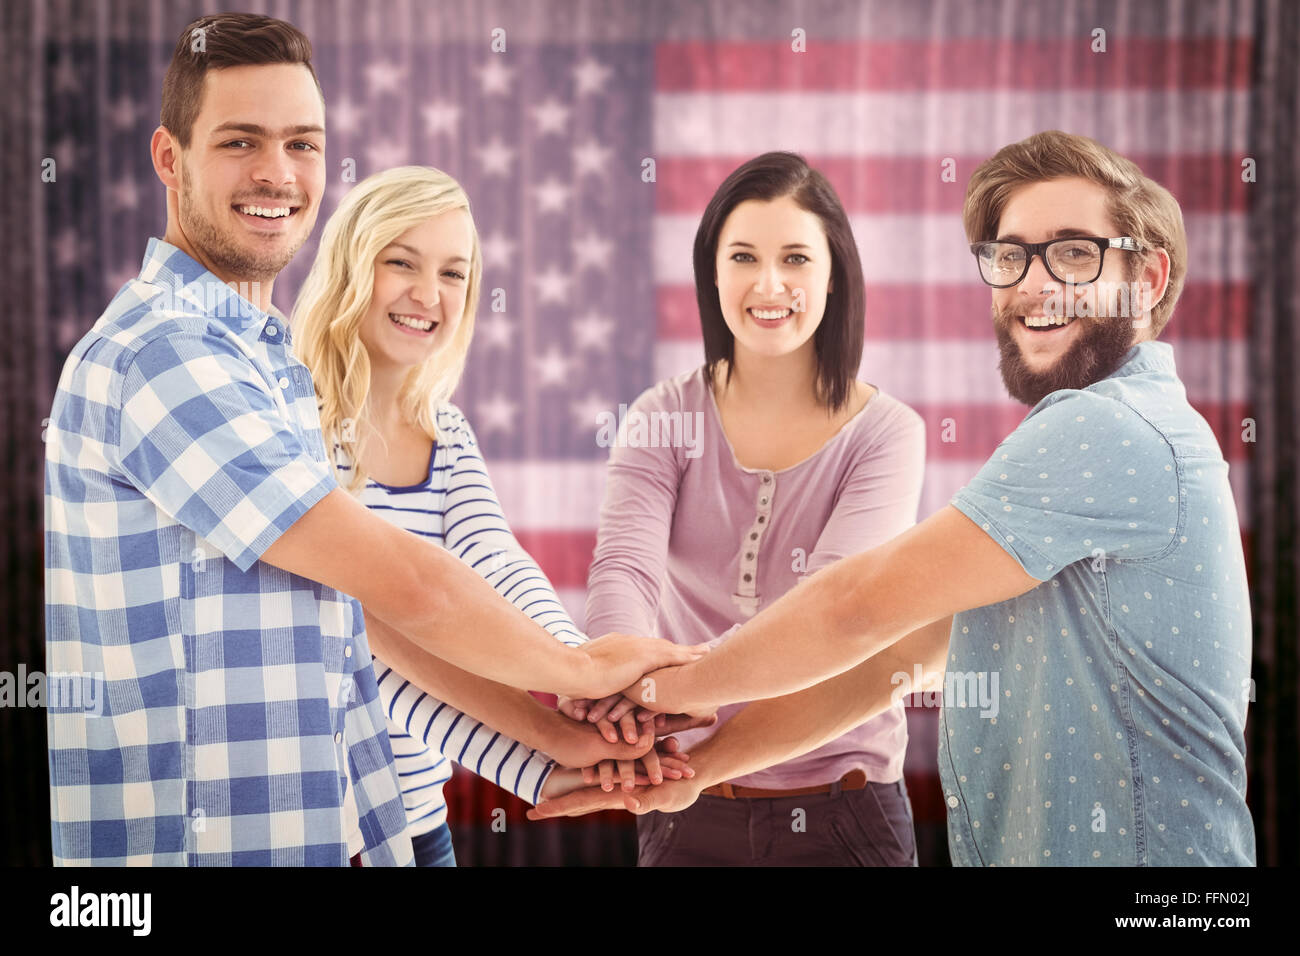 Composite image of portrait of smiling business people putting their hands together Stock Photo